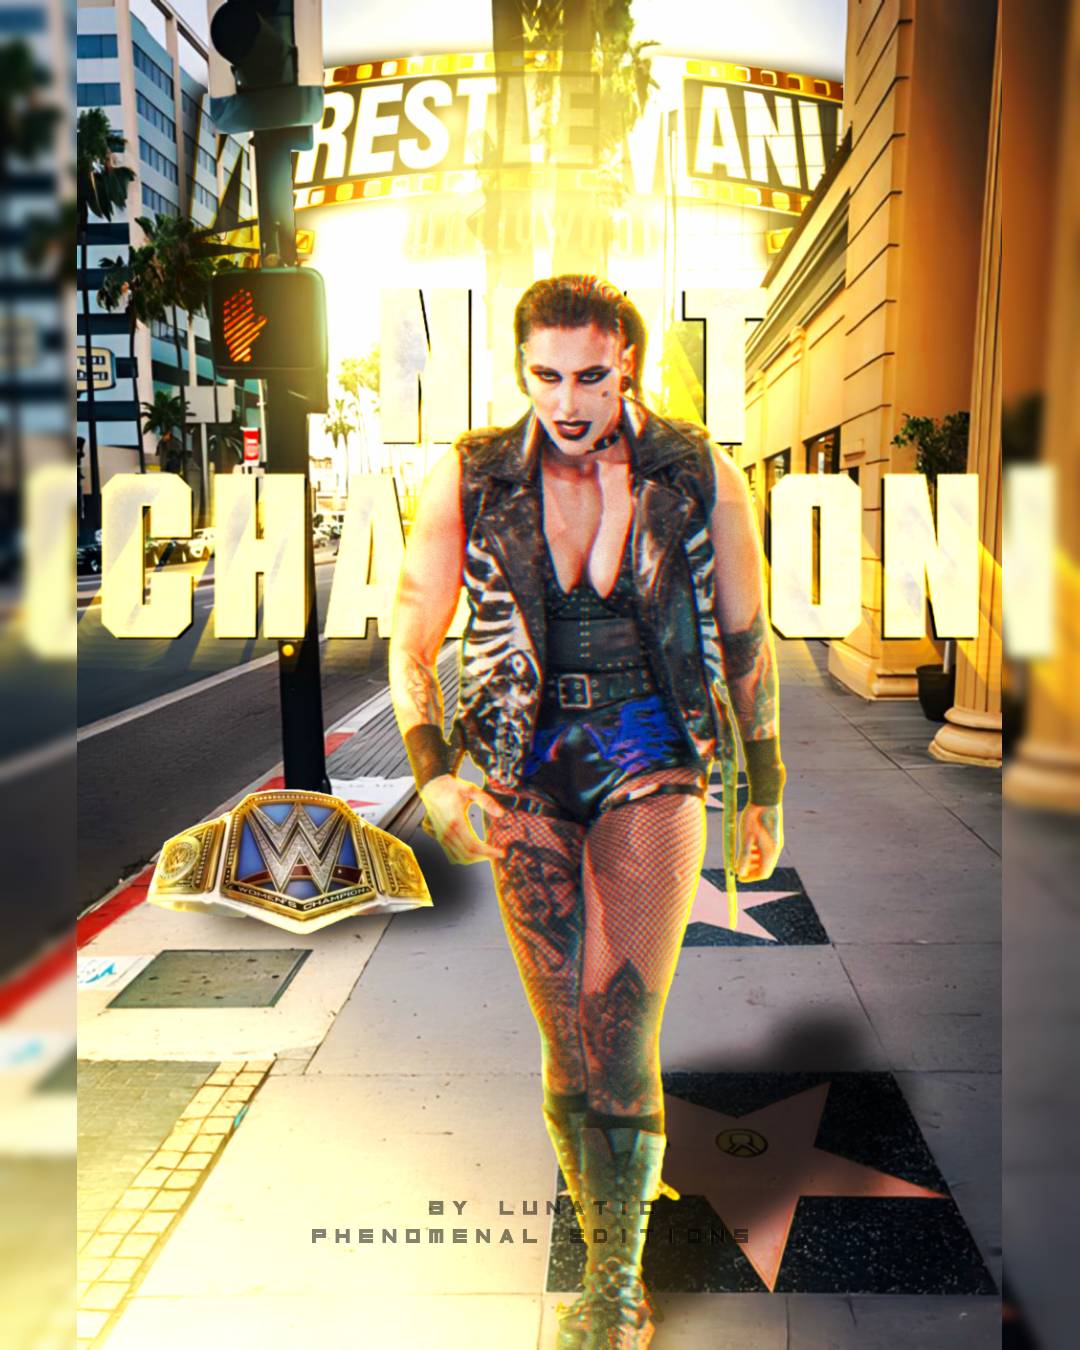 Current NXT Women's Champion Becky Lynch by Alexios29 on DeviantArt